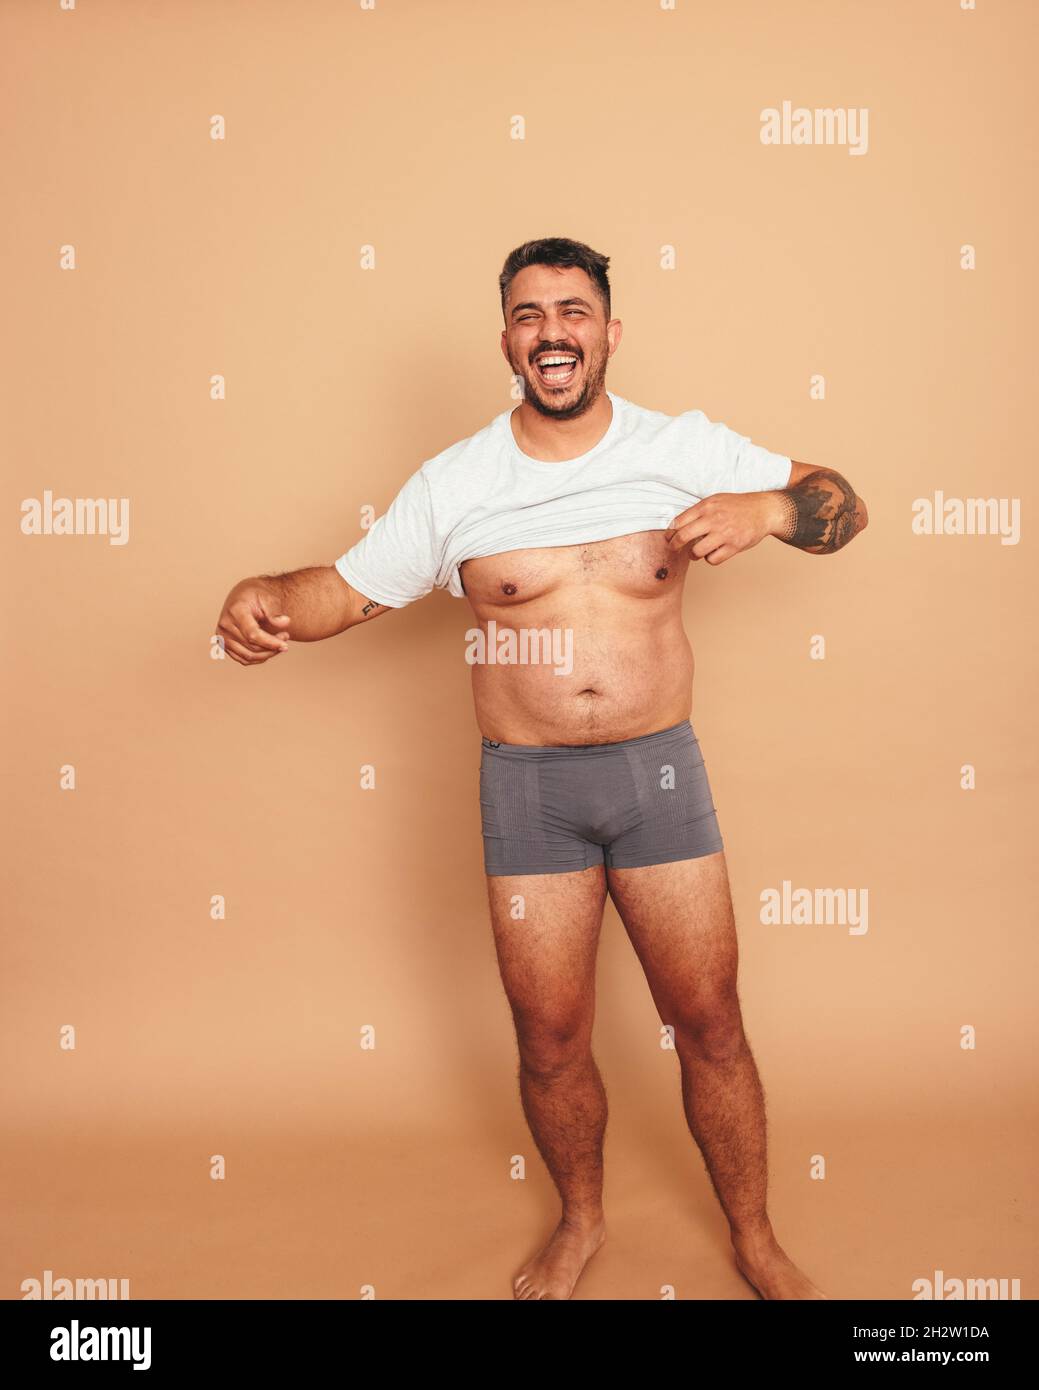 Flexing my natural body. Body positive young man lifting his shirt and smiling cheerfully while standing in a studio. Self-assured young man feeling c Stock Photo